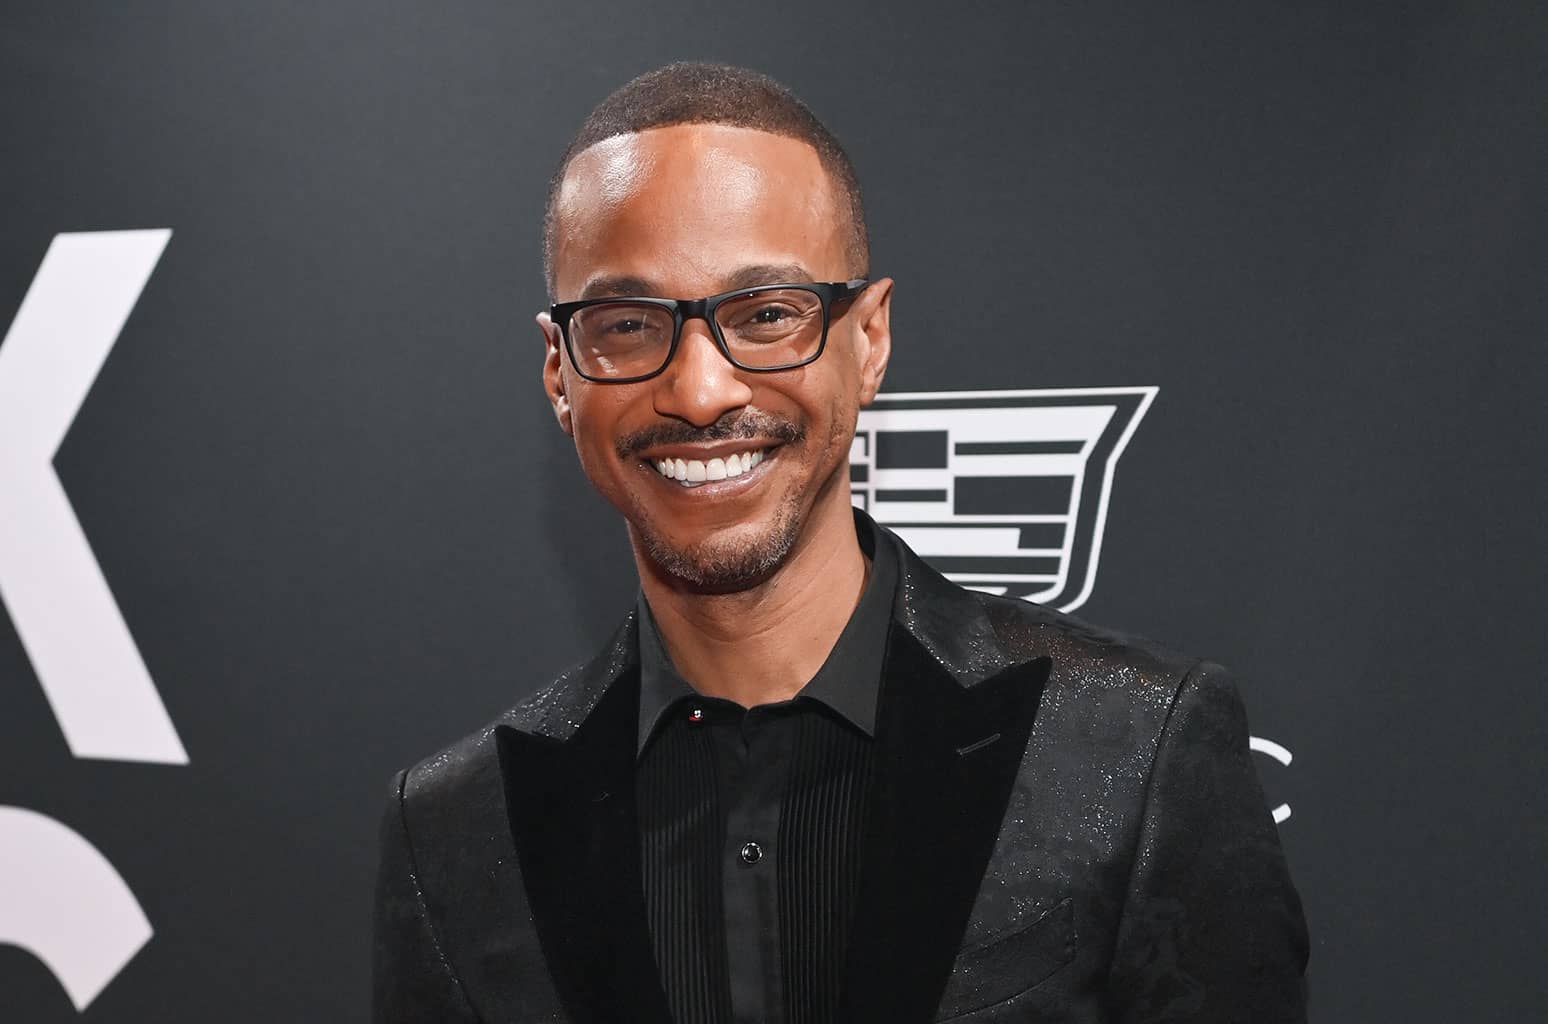 Who Is Tevin Campbell Dating? The Singer's Relationship Status